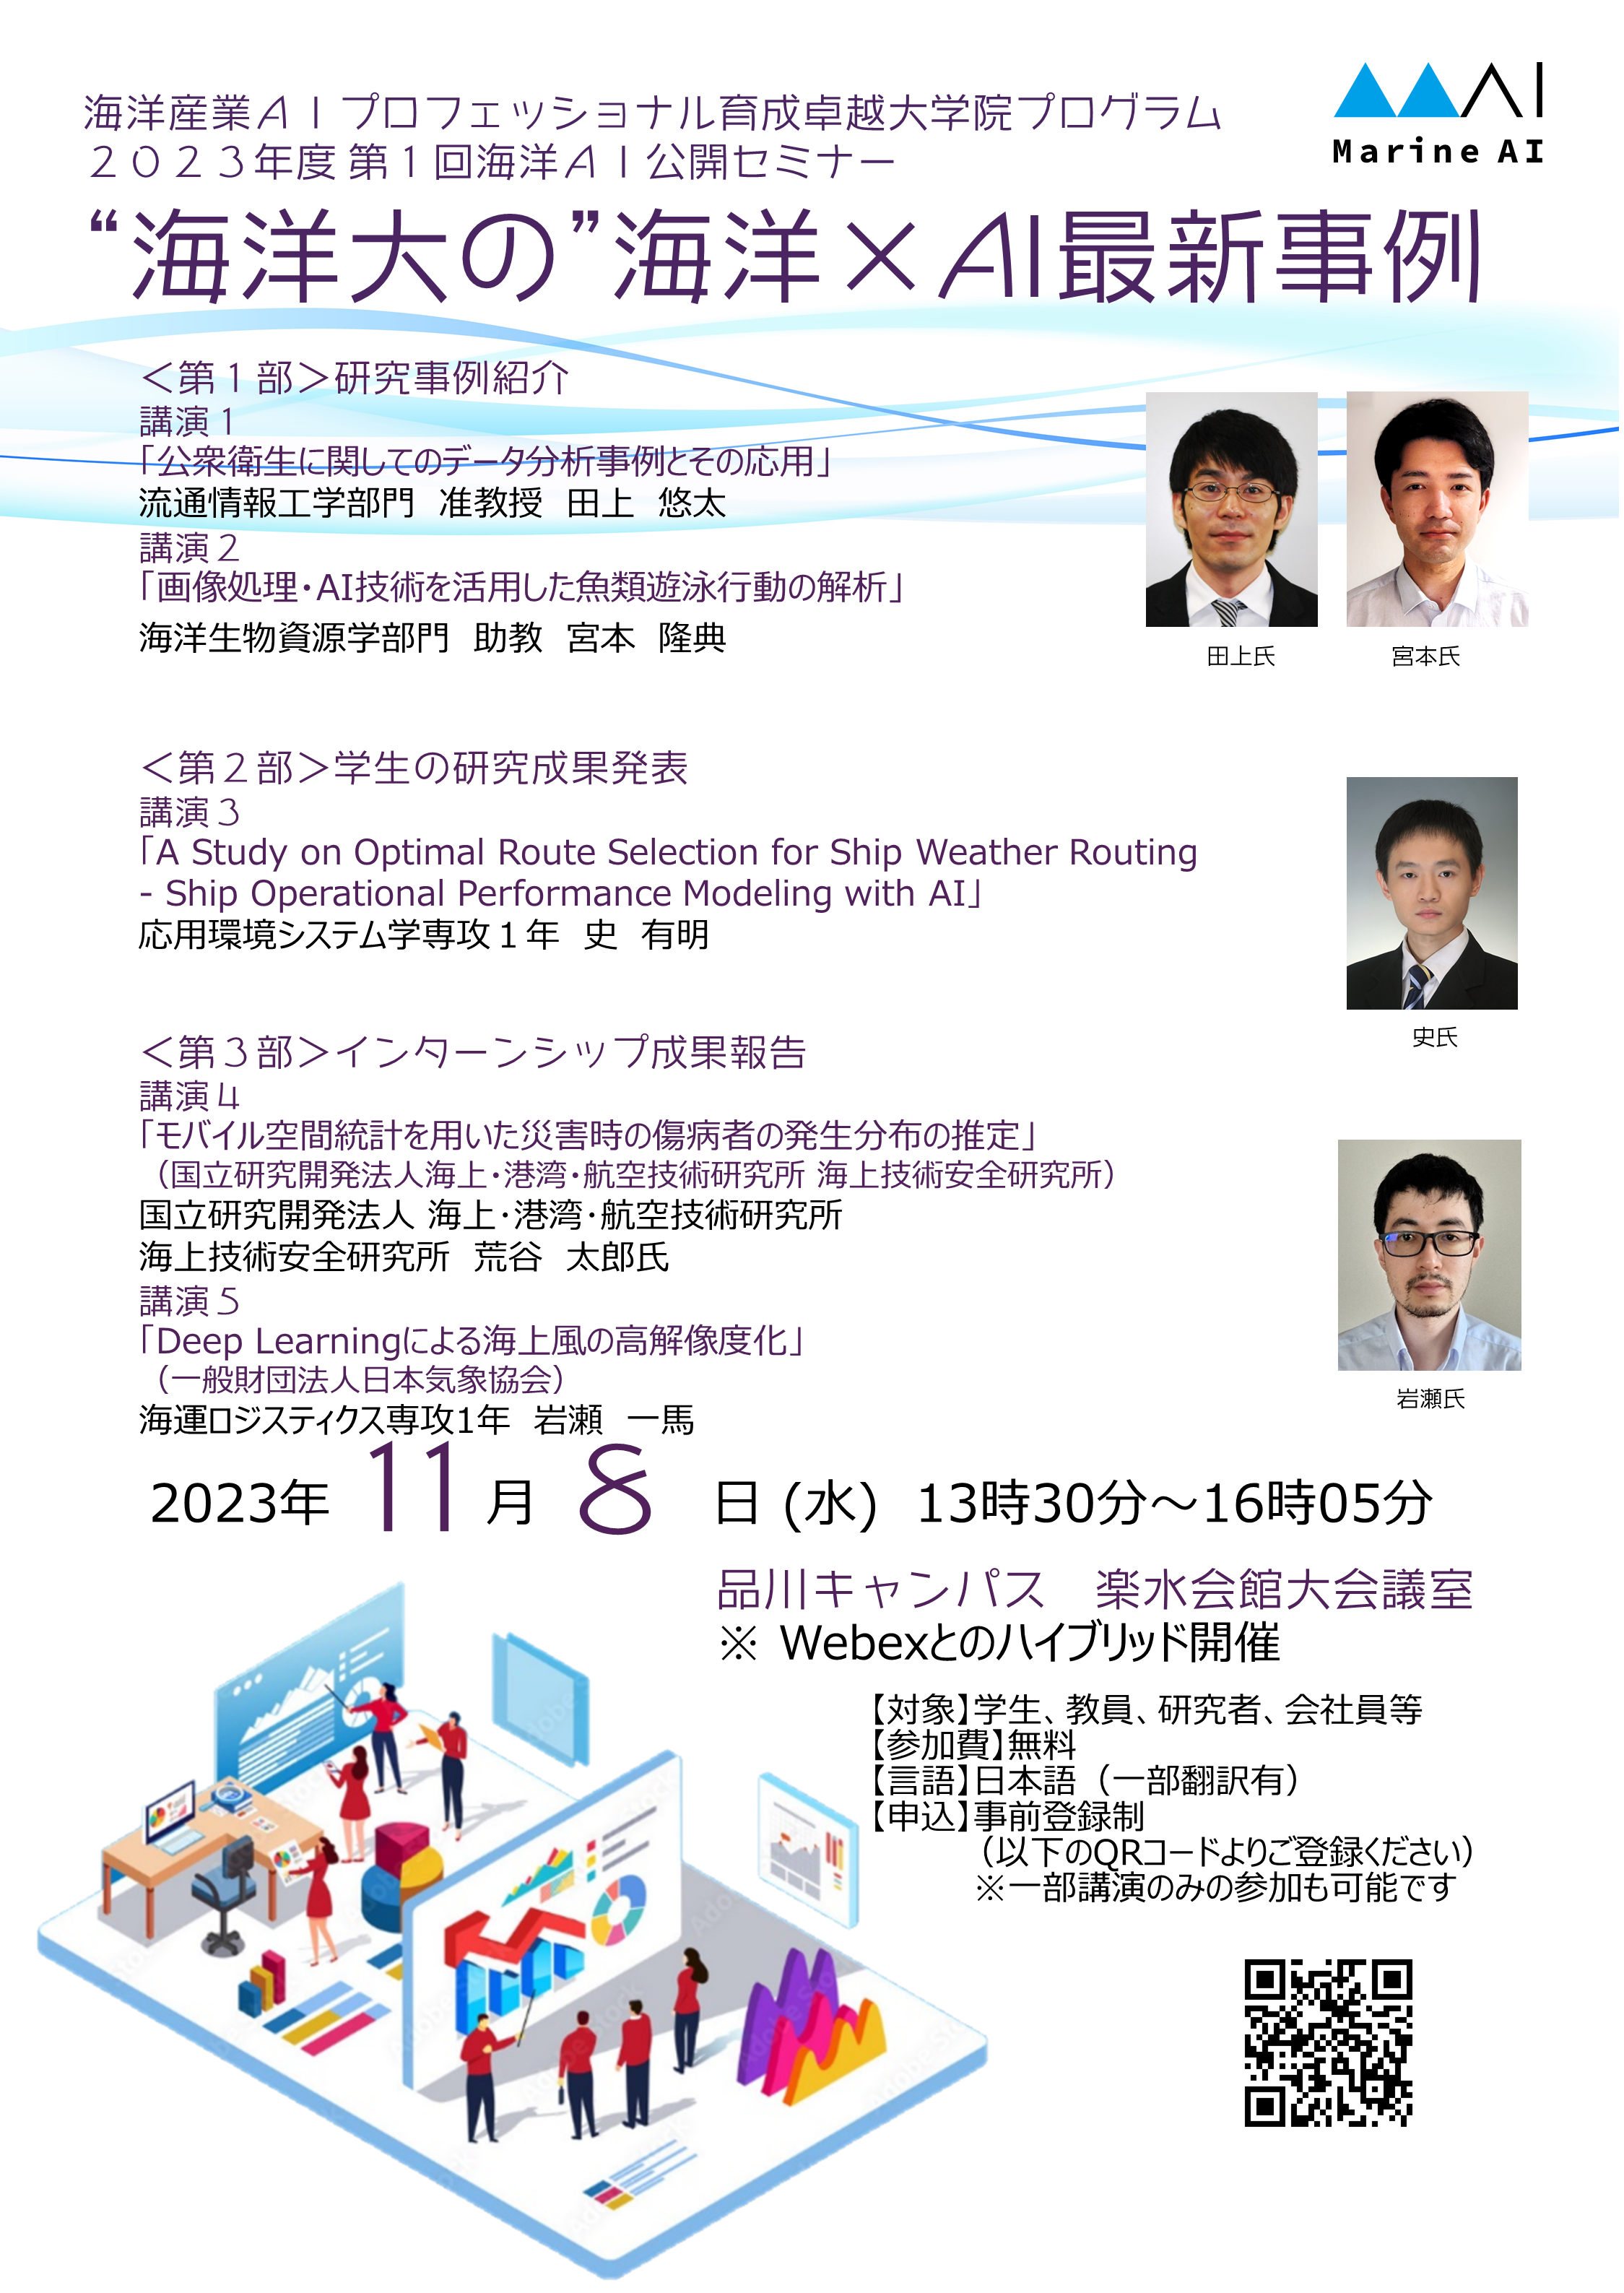 【Archived Articles】The 1st Marine AI Open Seminar in AY2023    